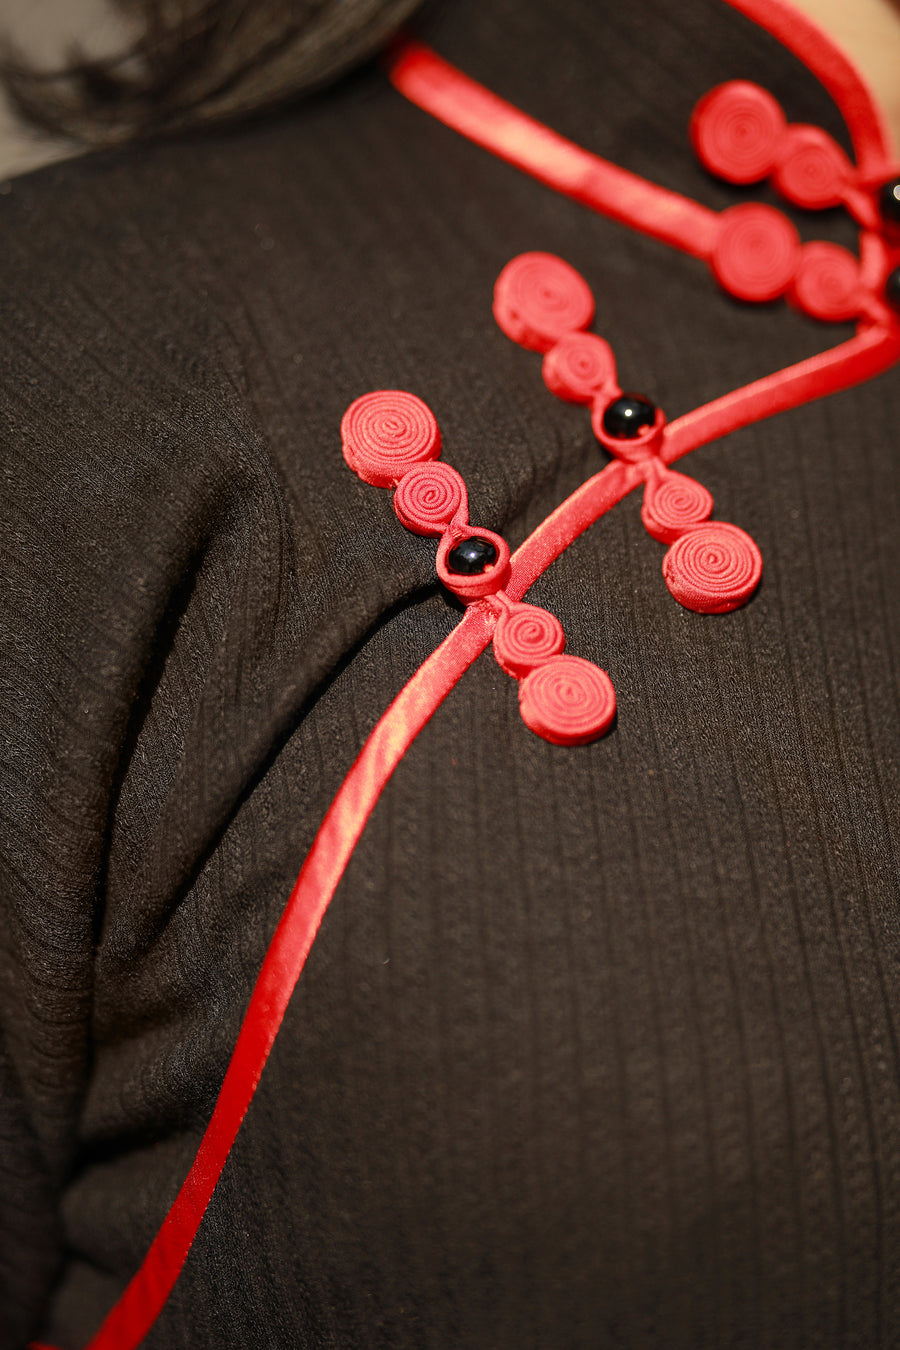 The Touch of Scarlet Qipao - Black with Red Edge